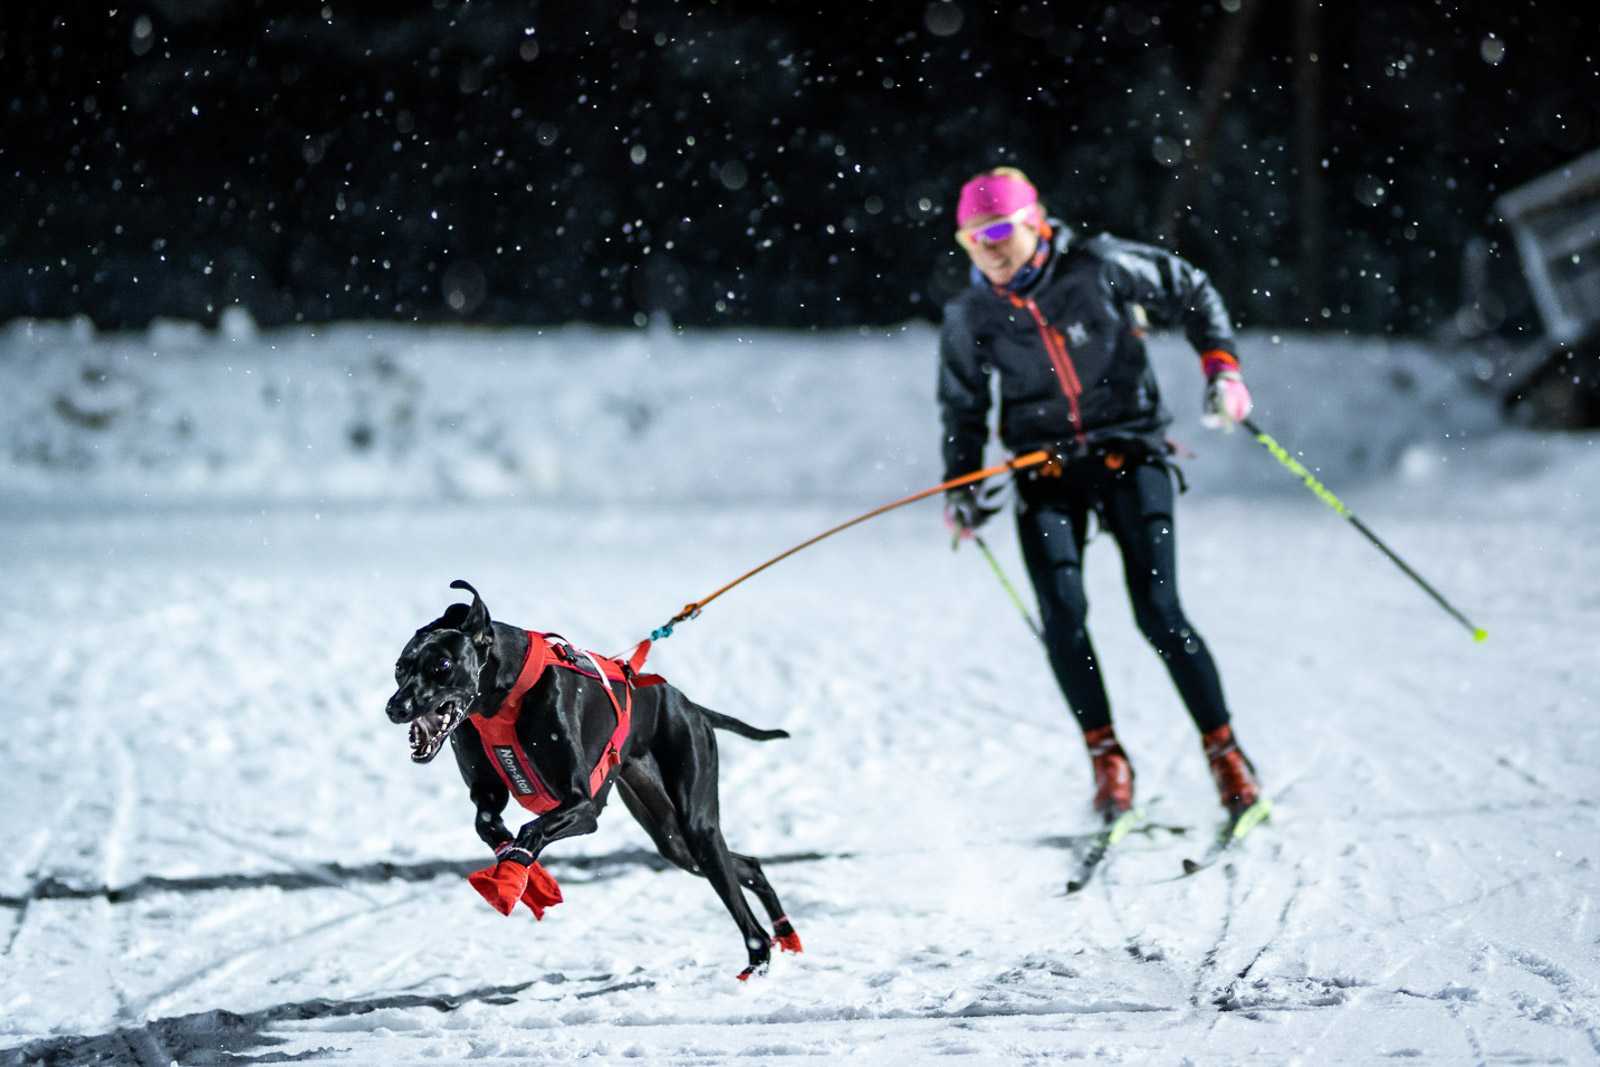 Everything you need to know about skijoring and skiing with dogs gathered in one place!  